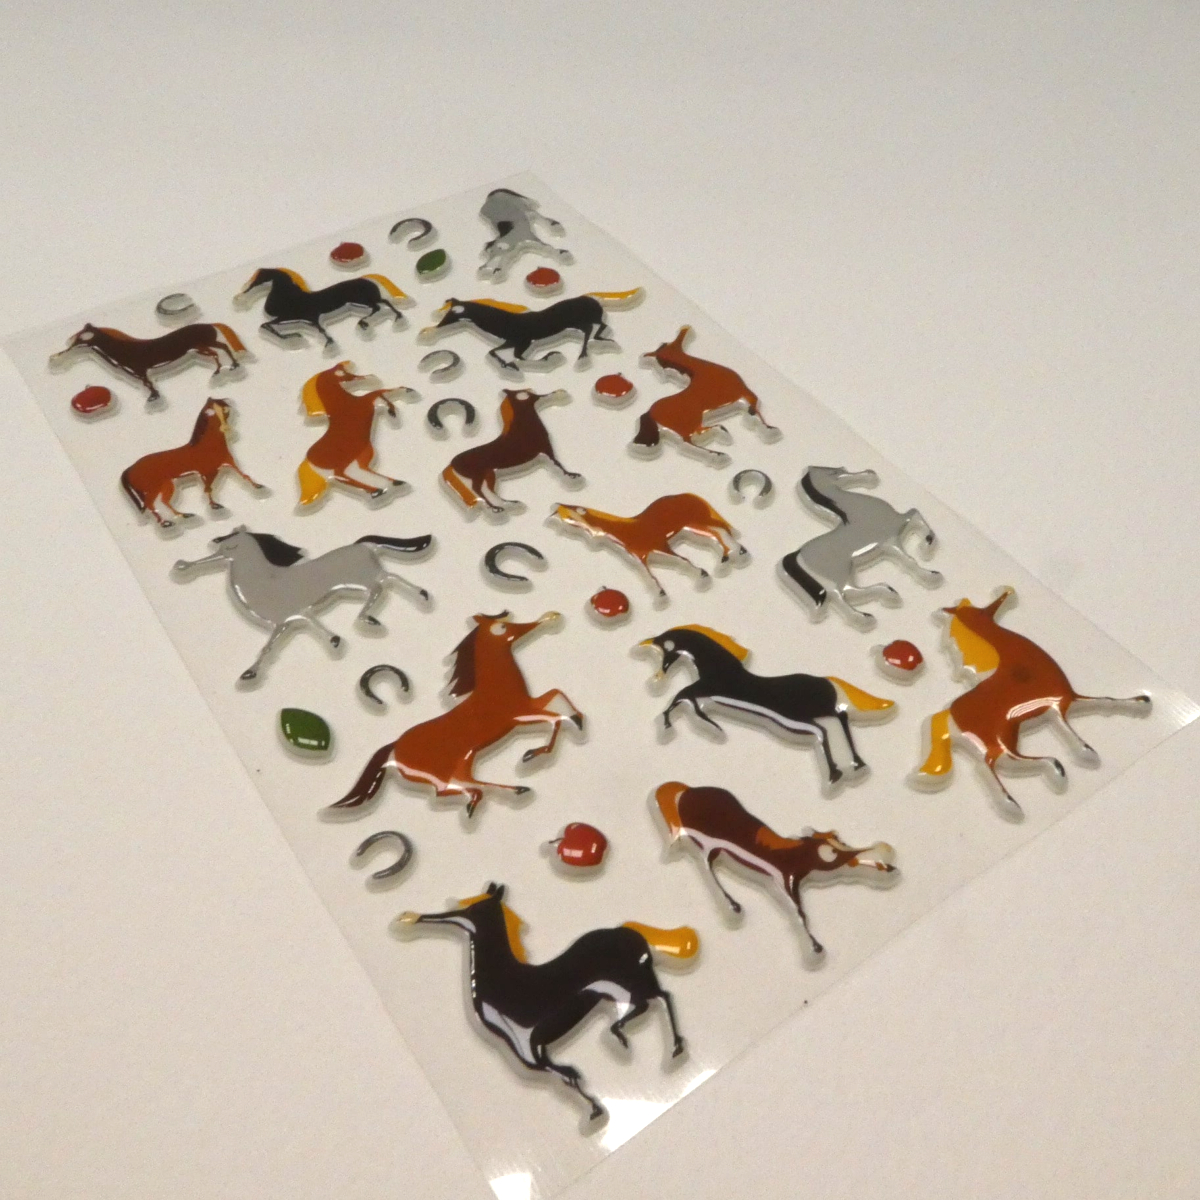 stickers-chevaux-2-zoom